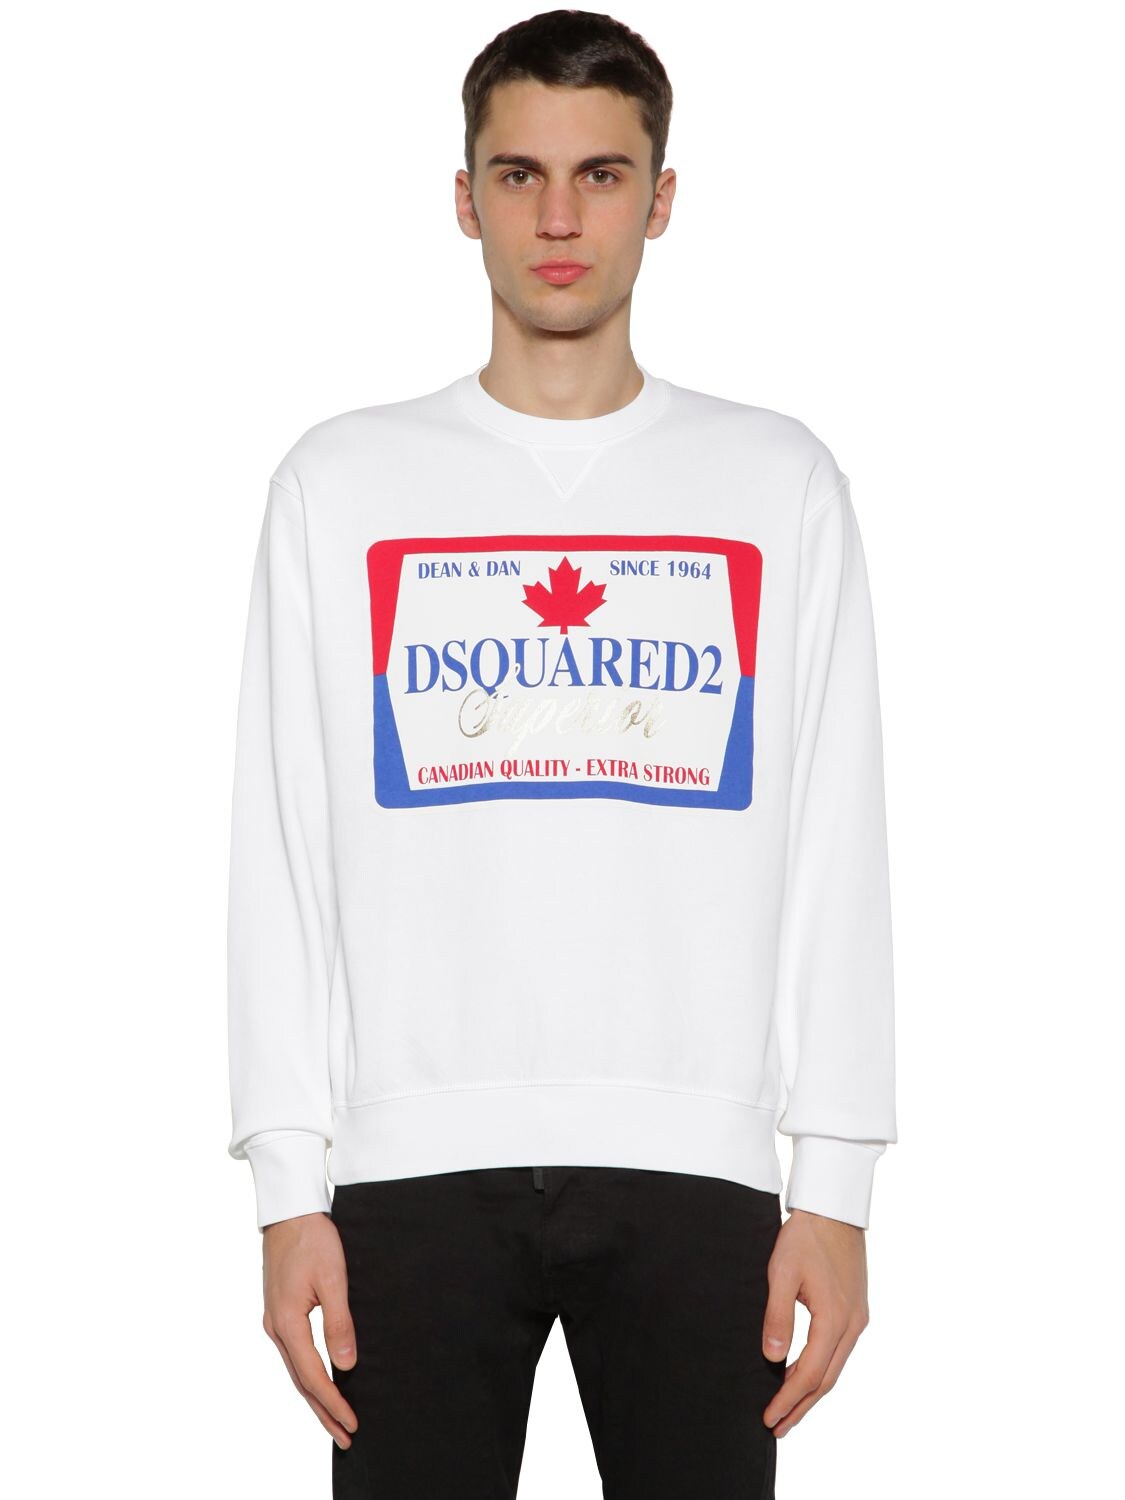 DSQUARED2 PRINTED COTTON JERSEY SWEATSHIRT,70IG7E087-MTAW0